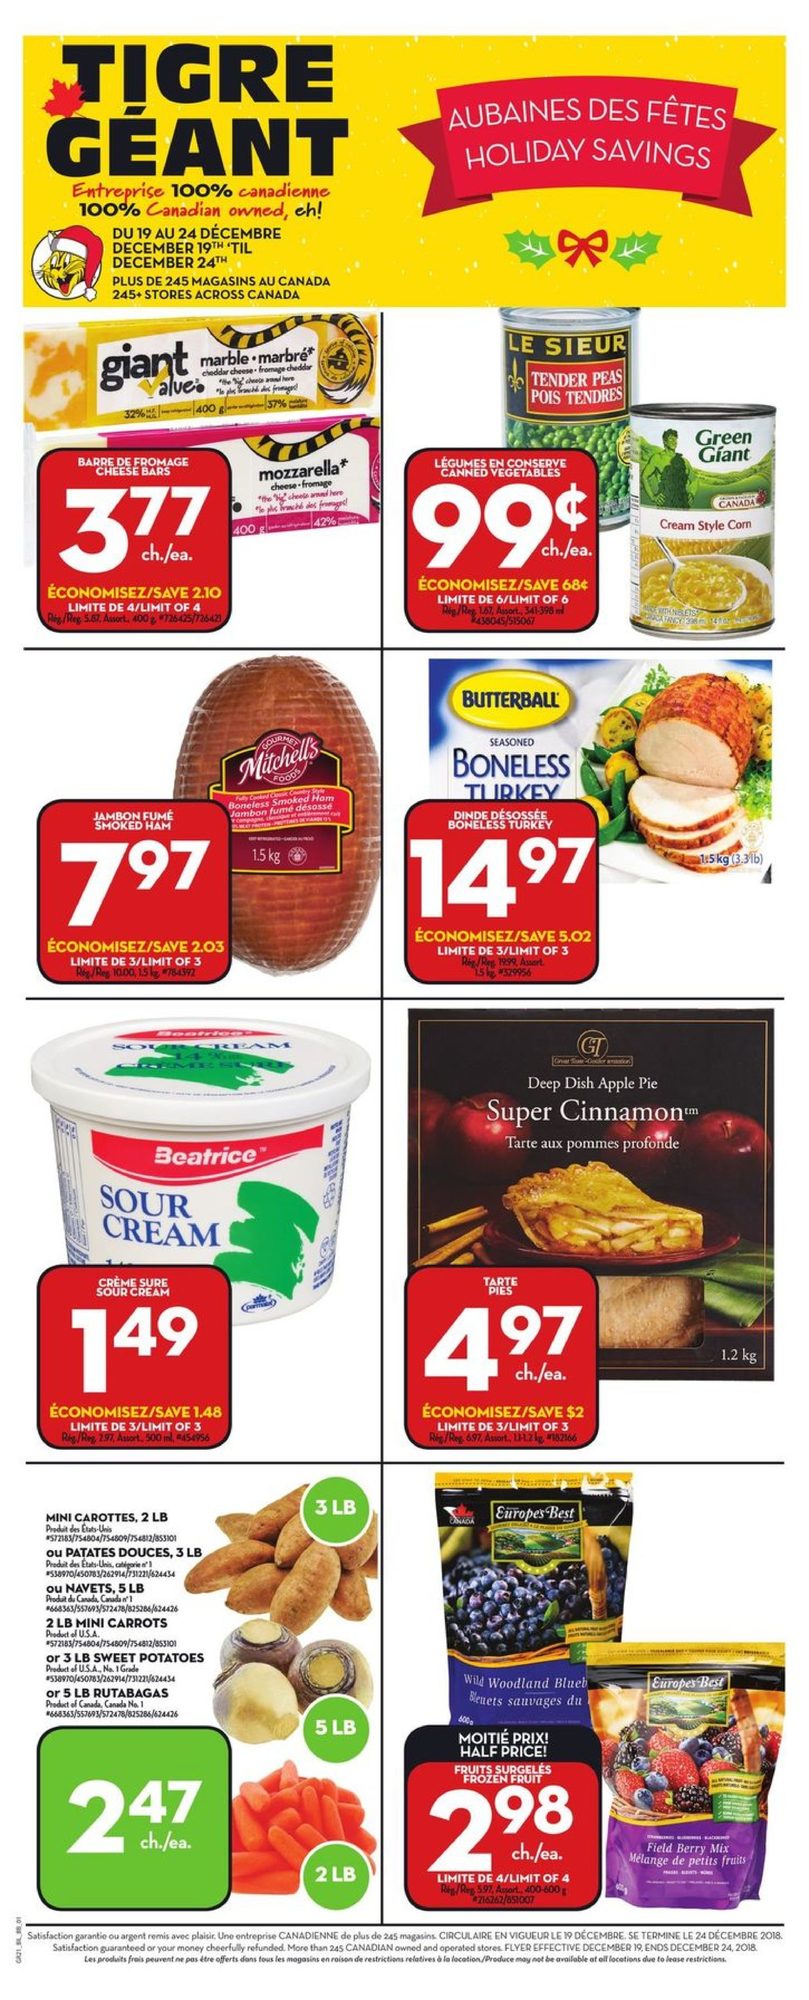 Holiday Savings & Early Boxing Week Deals! - Giant Tiger December 19